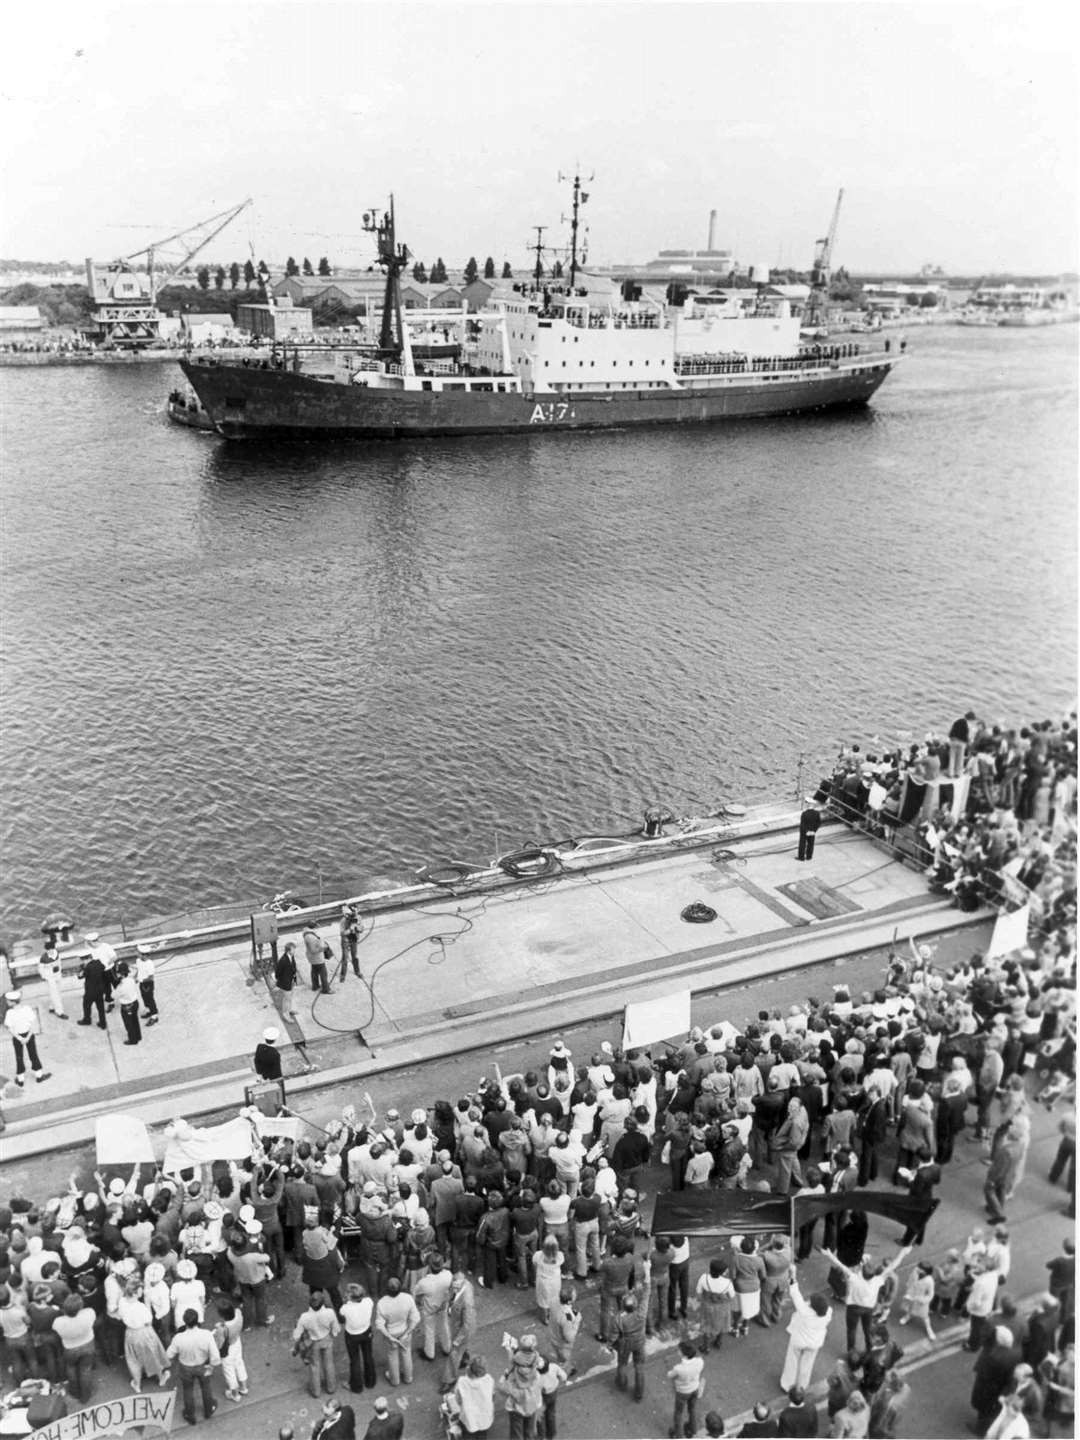 Crowds greet the return of HMS Endurance returning to Chatham Dockyard from the Falklands Islands. August 20, 1982. Picture: KMG